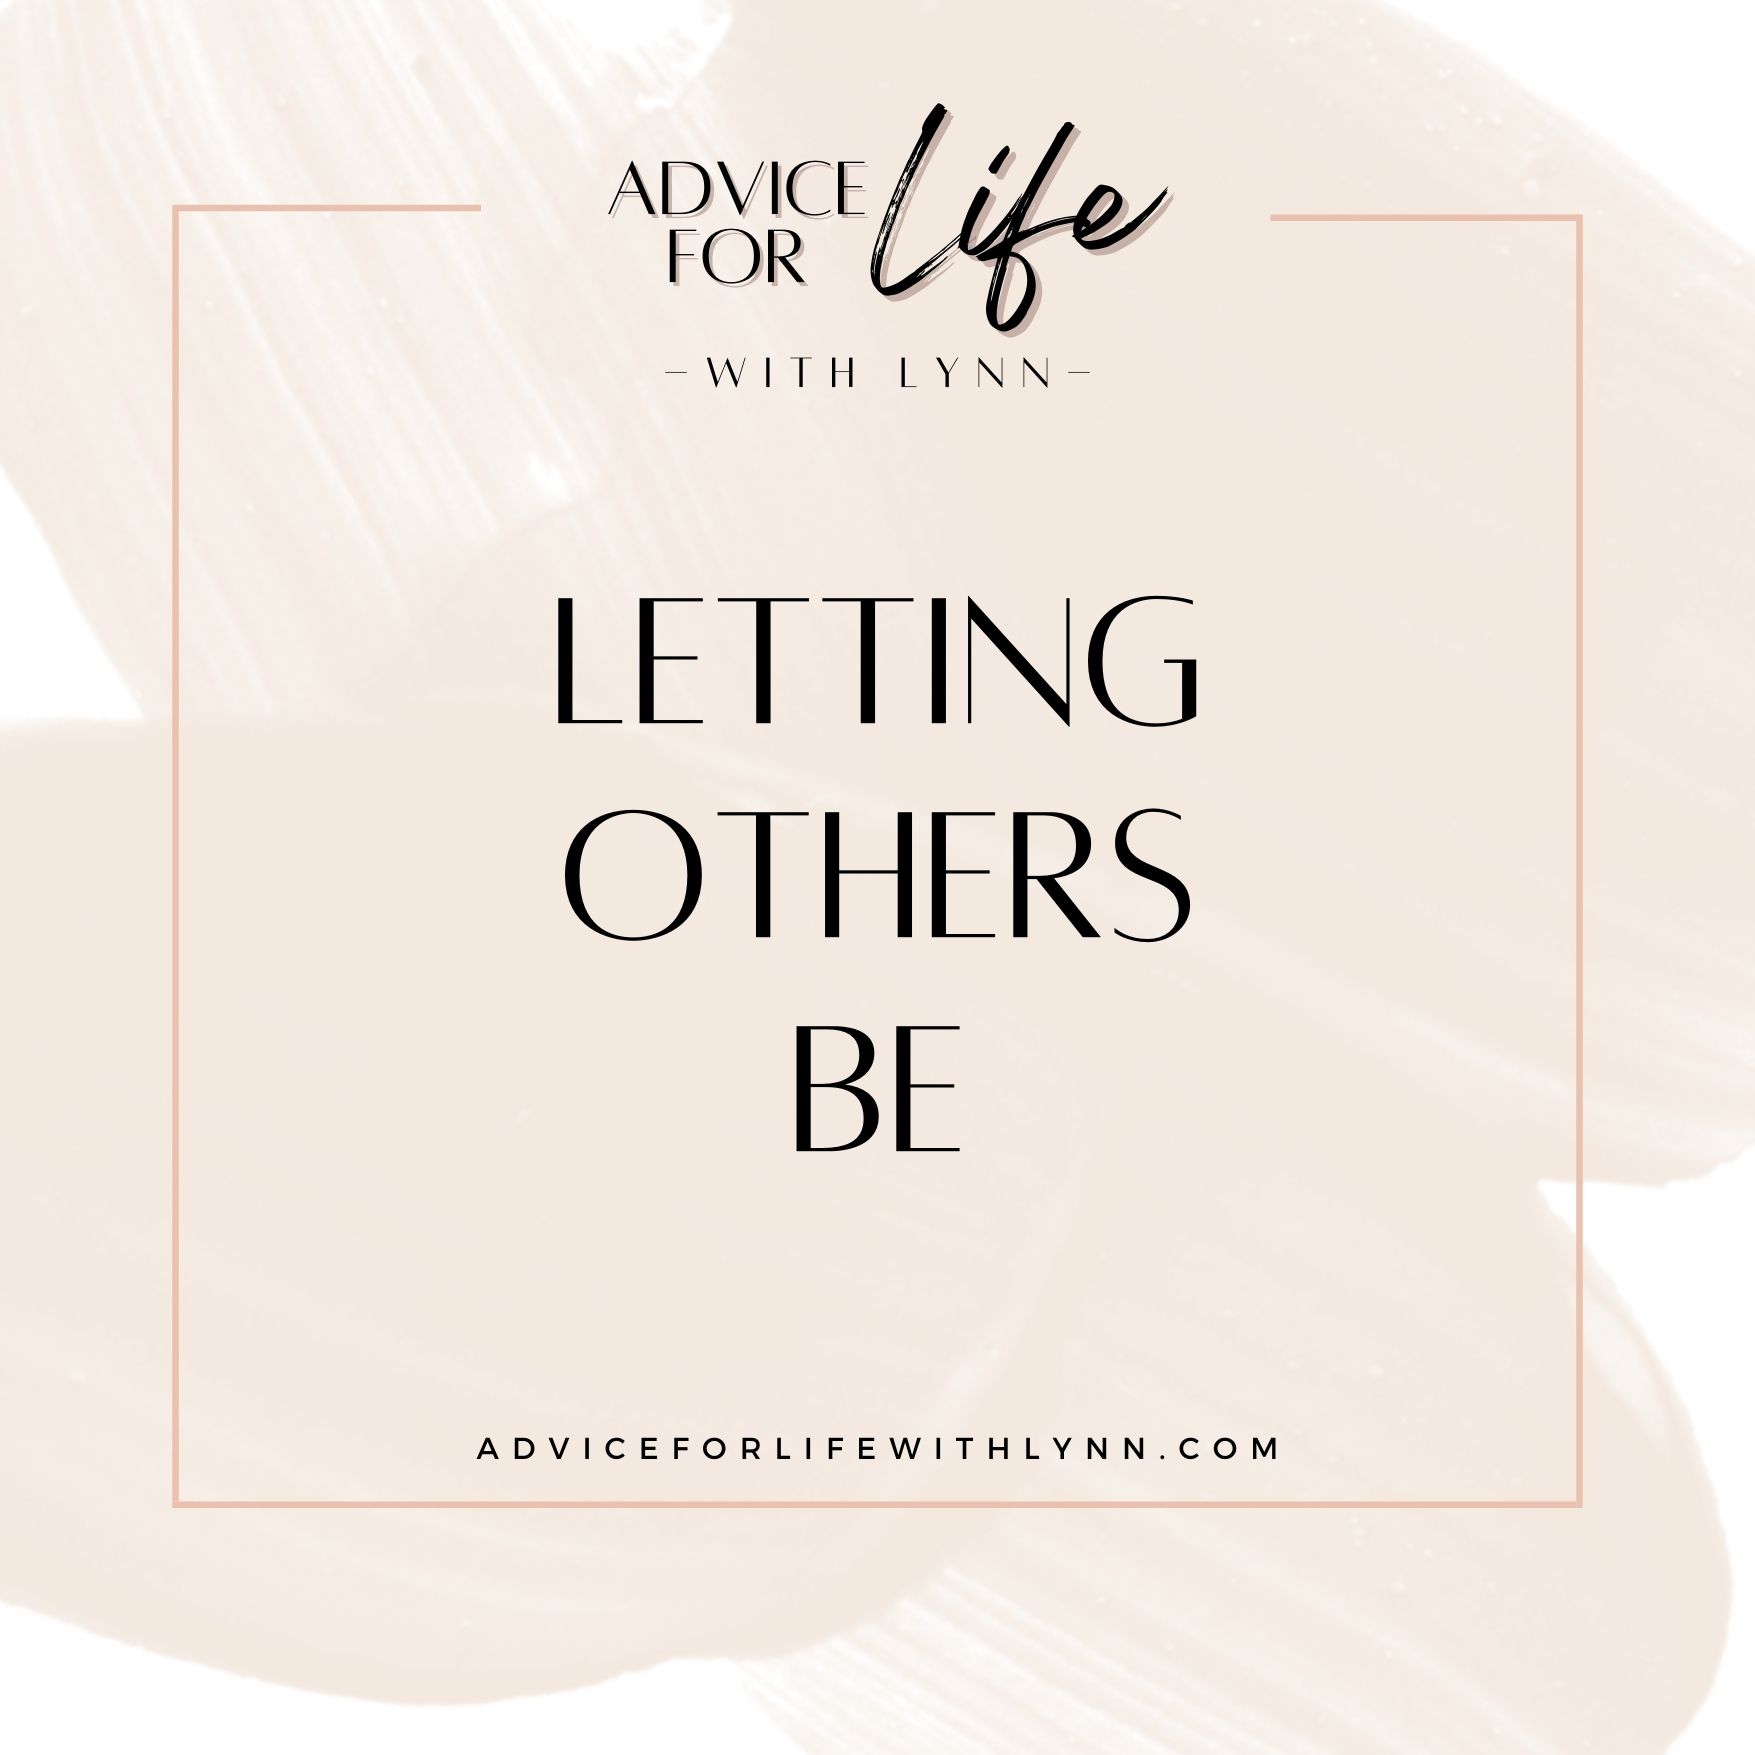 Letting Others Be